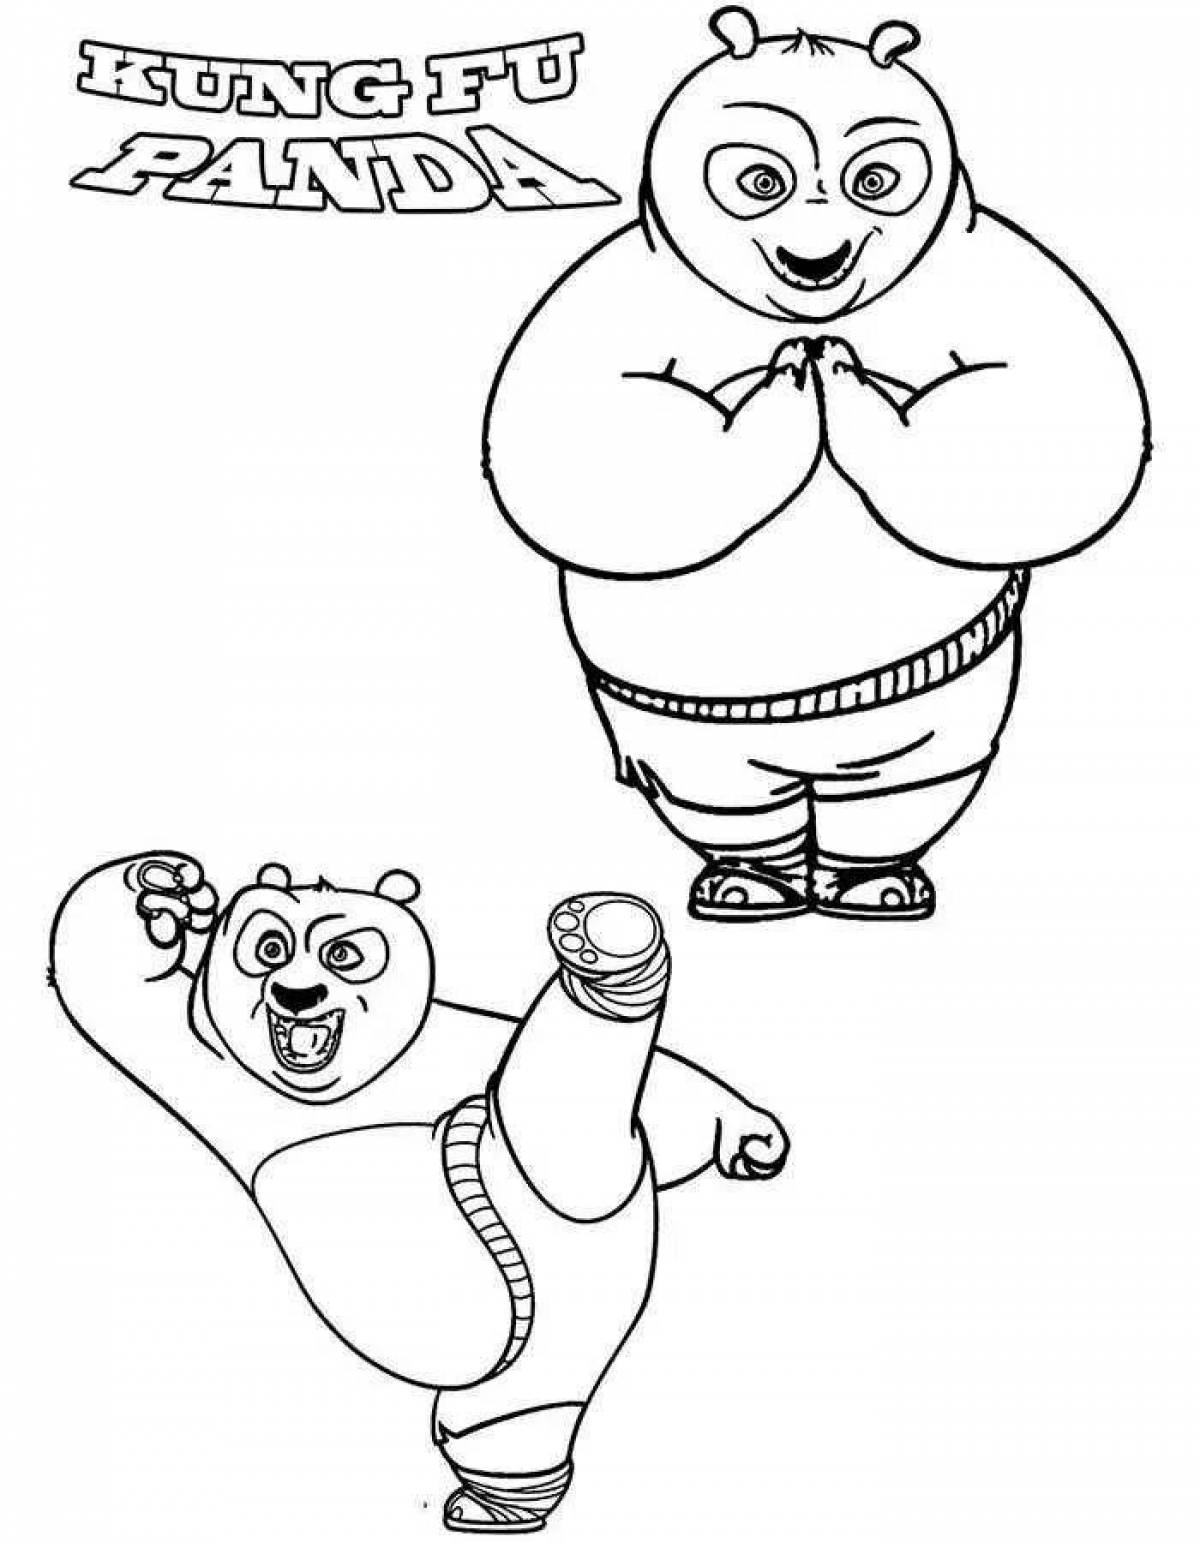 Kung fu panda coloring book with bright colors